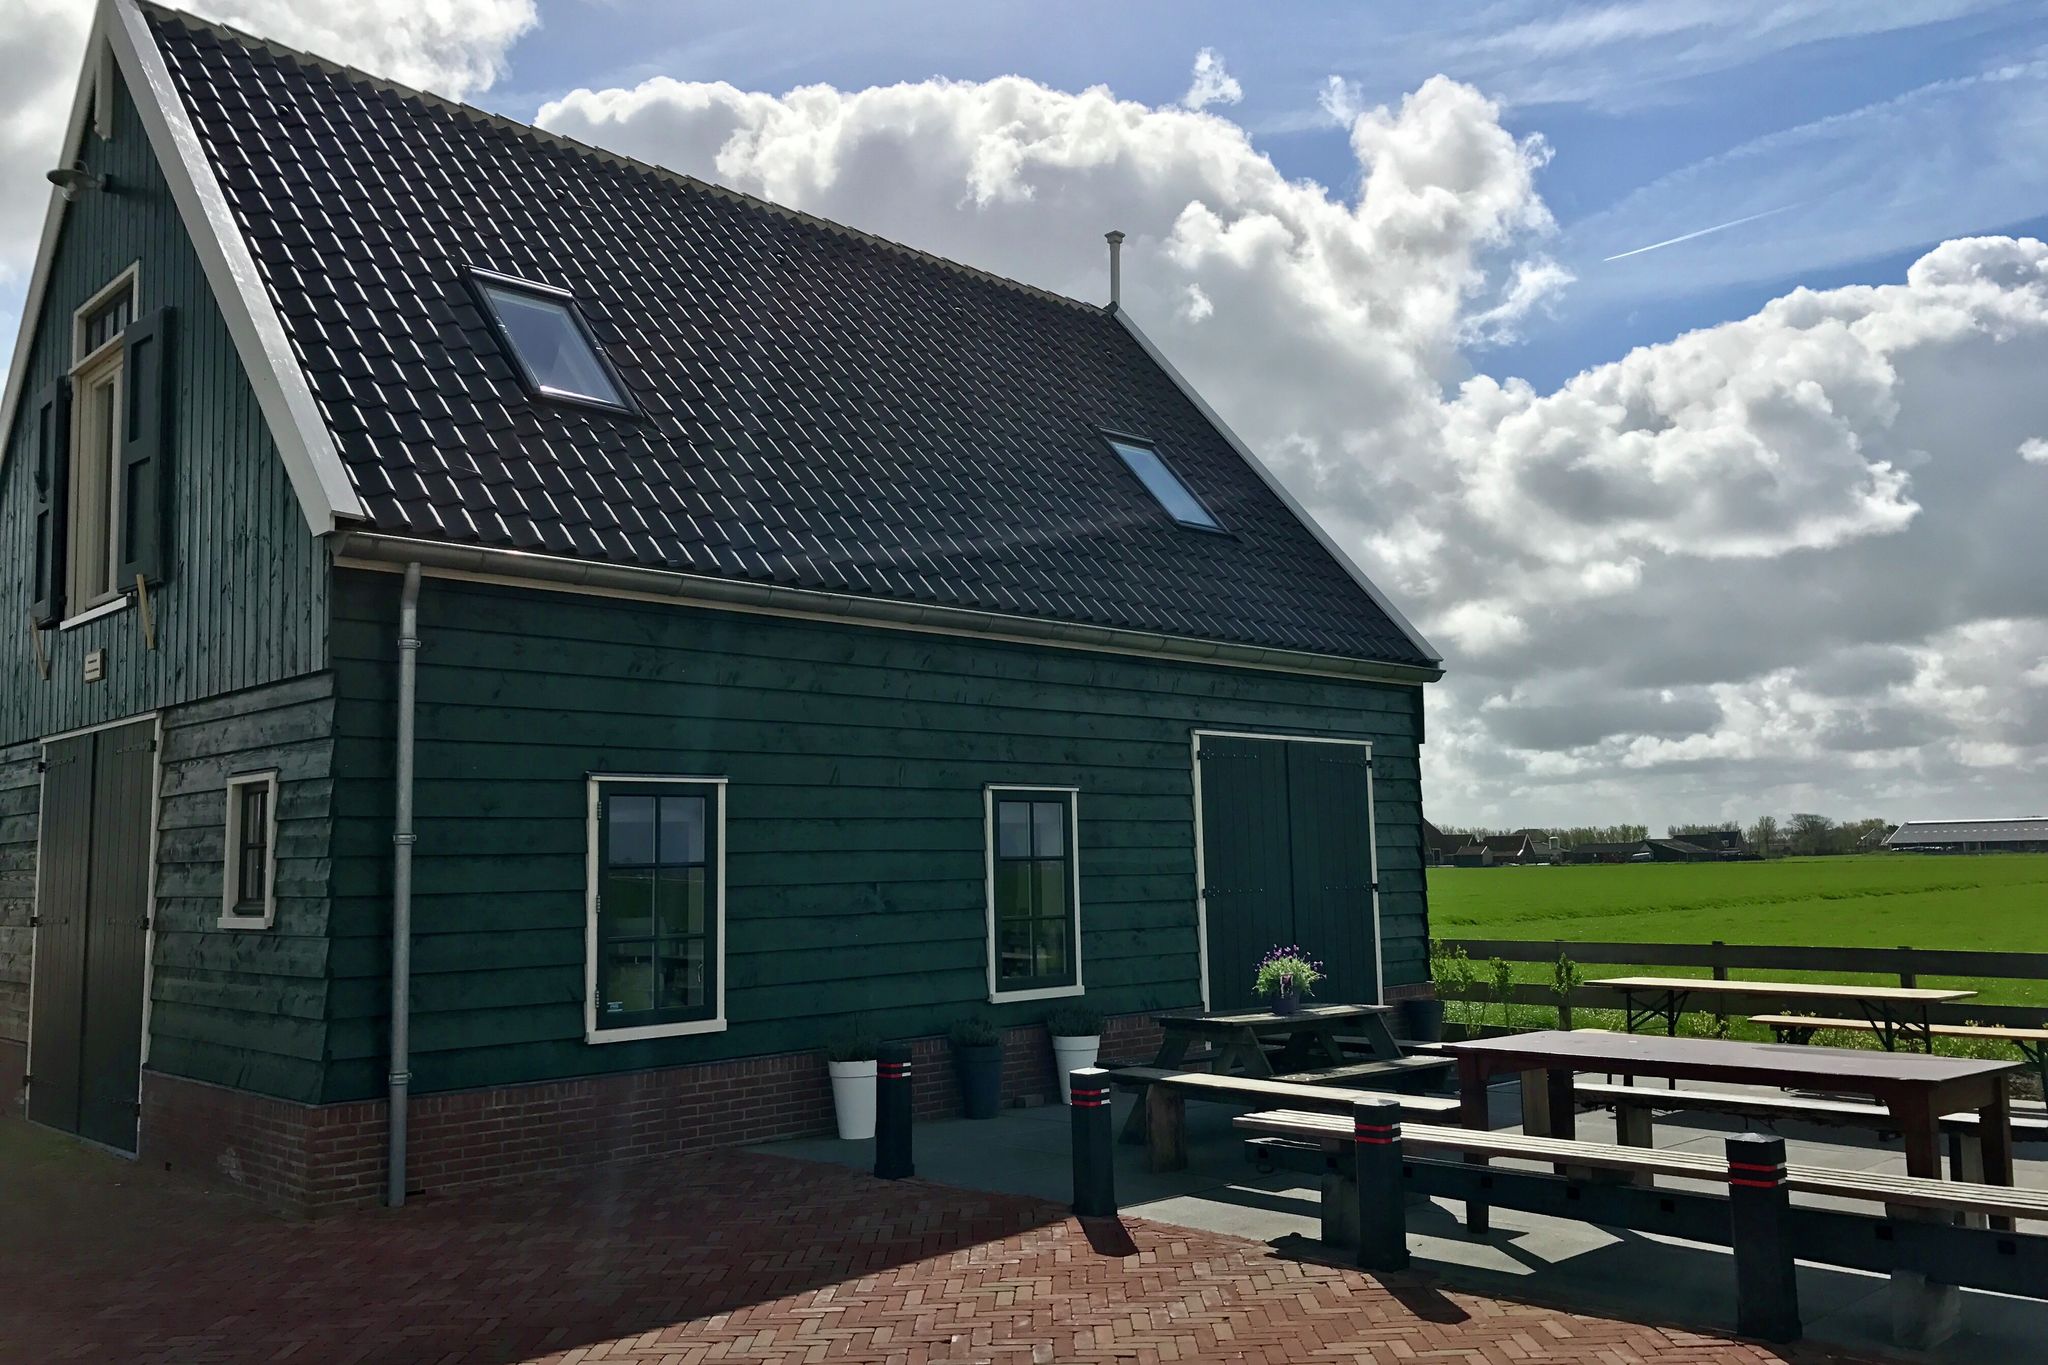 Holiday home in Beemster near a windmill